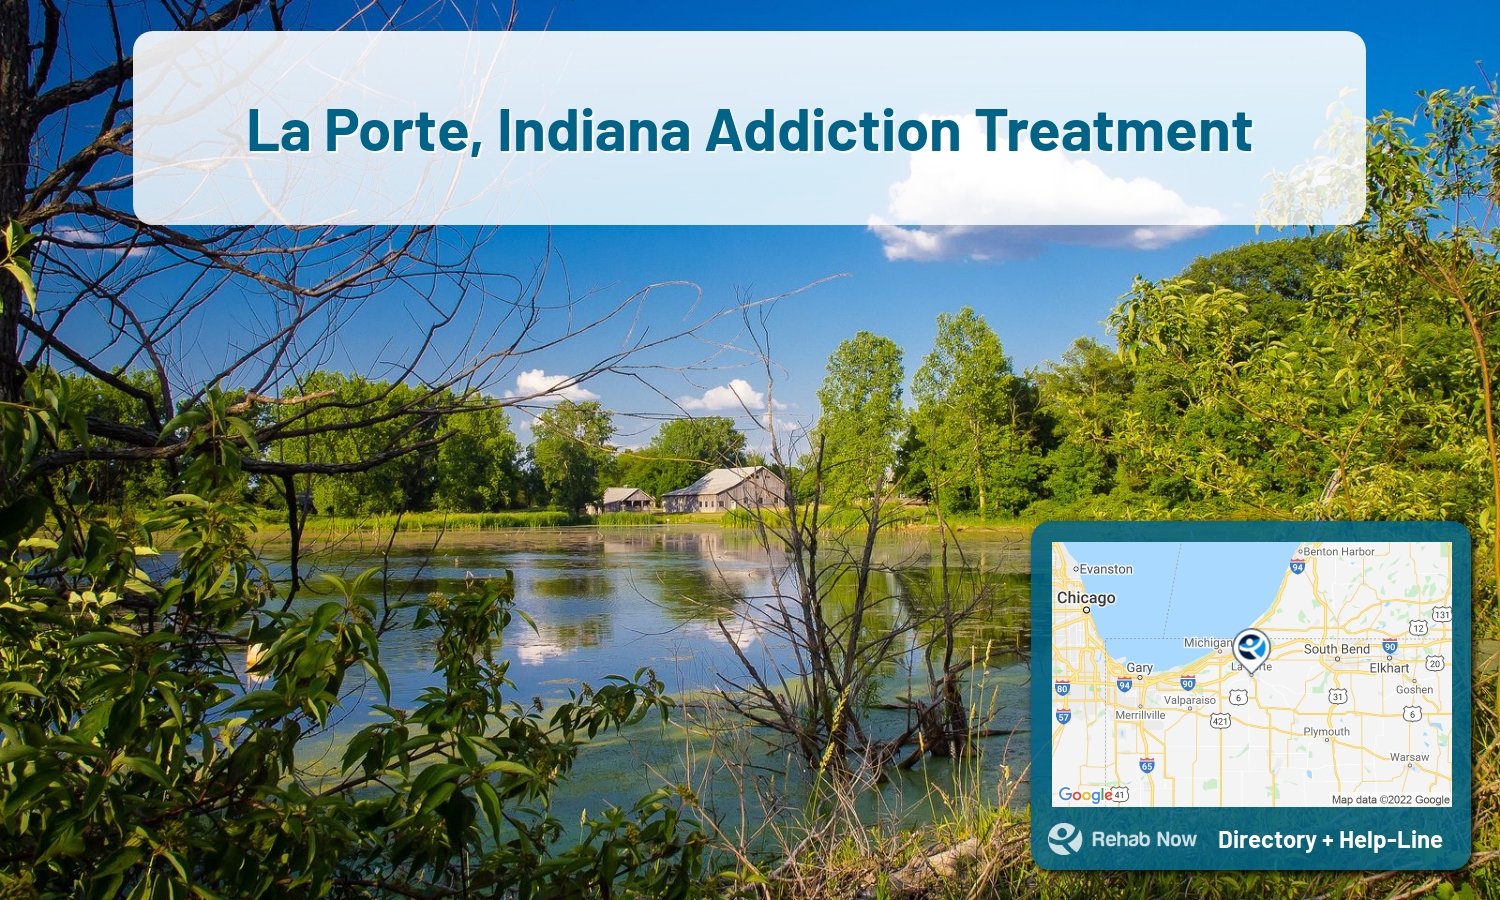 Our experts can help you find treatment now in La Porte, Indiana. We list drug rehab and alcohol centers in Indiana.